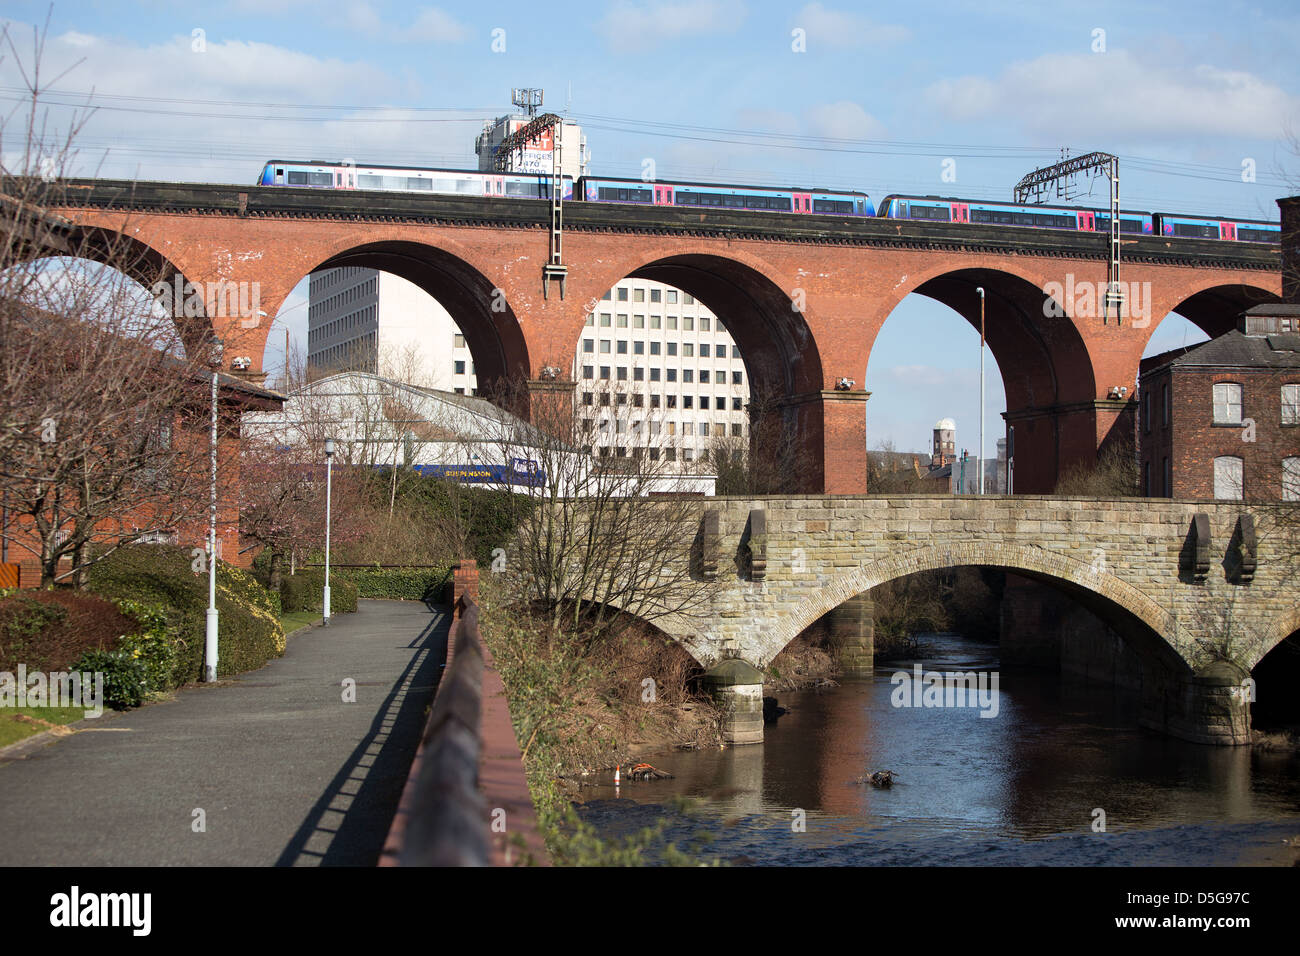 The Stockport Viaduct . The bridge carries the railway over the River Mersey in Stockport , Greater Manchester Stock Photo